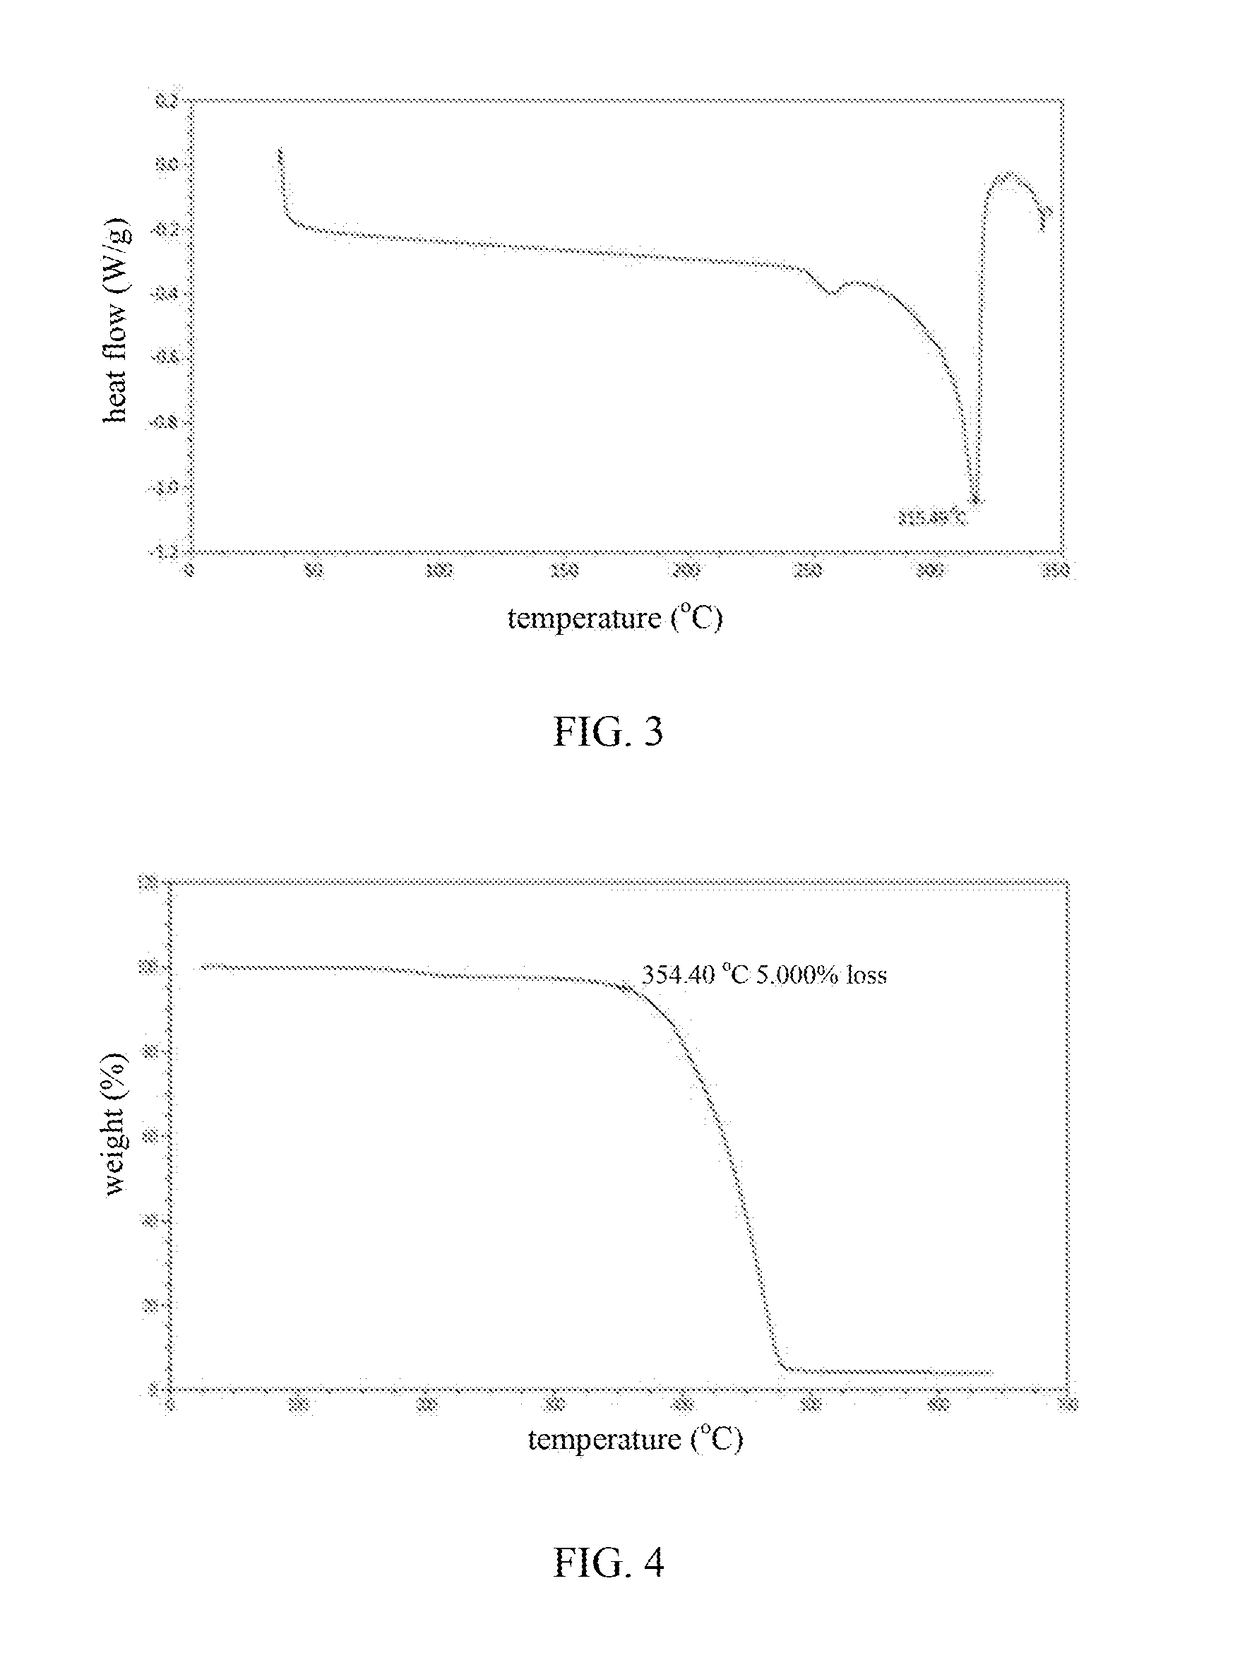 Flame retardant compound, method of preparing the same and use thereof